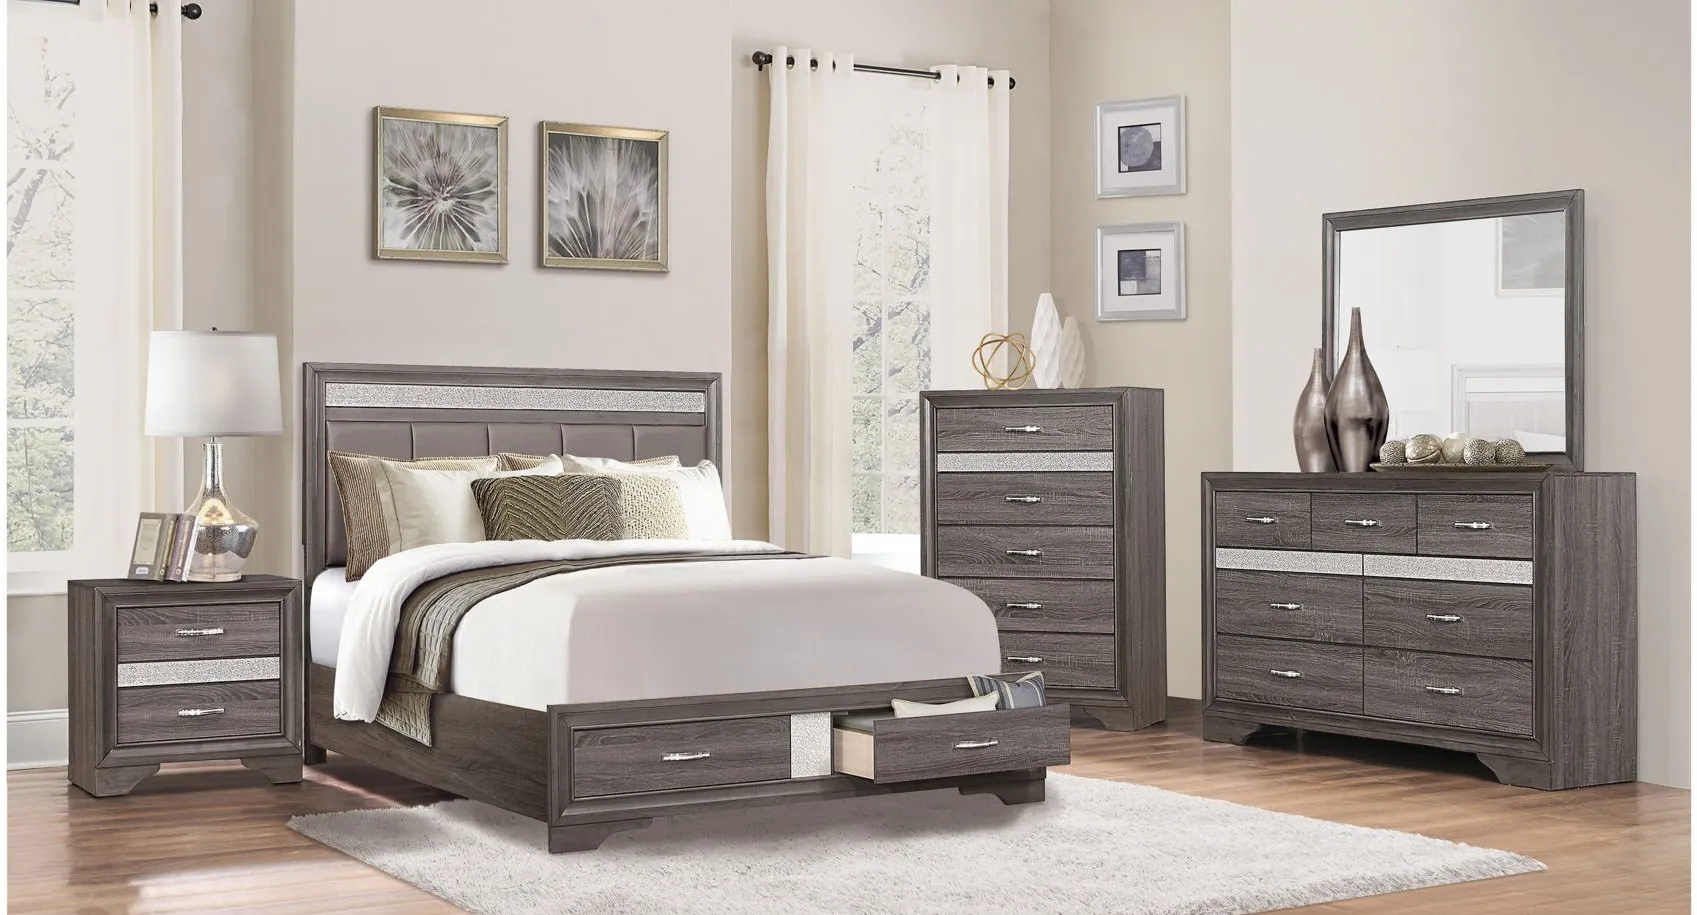 Griggs 4-pc.Upholstered Storage Bedroom Set in Two-Tone Finish (Gray and Silver Glitter) by Homelegance